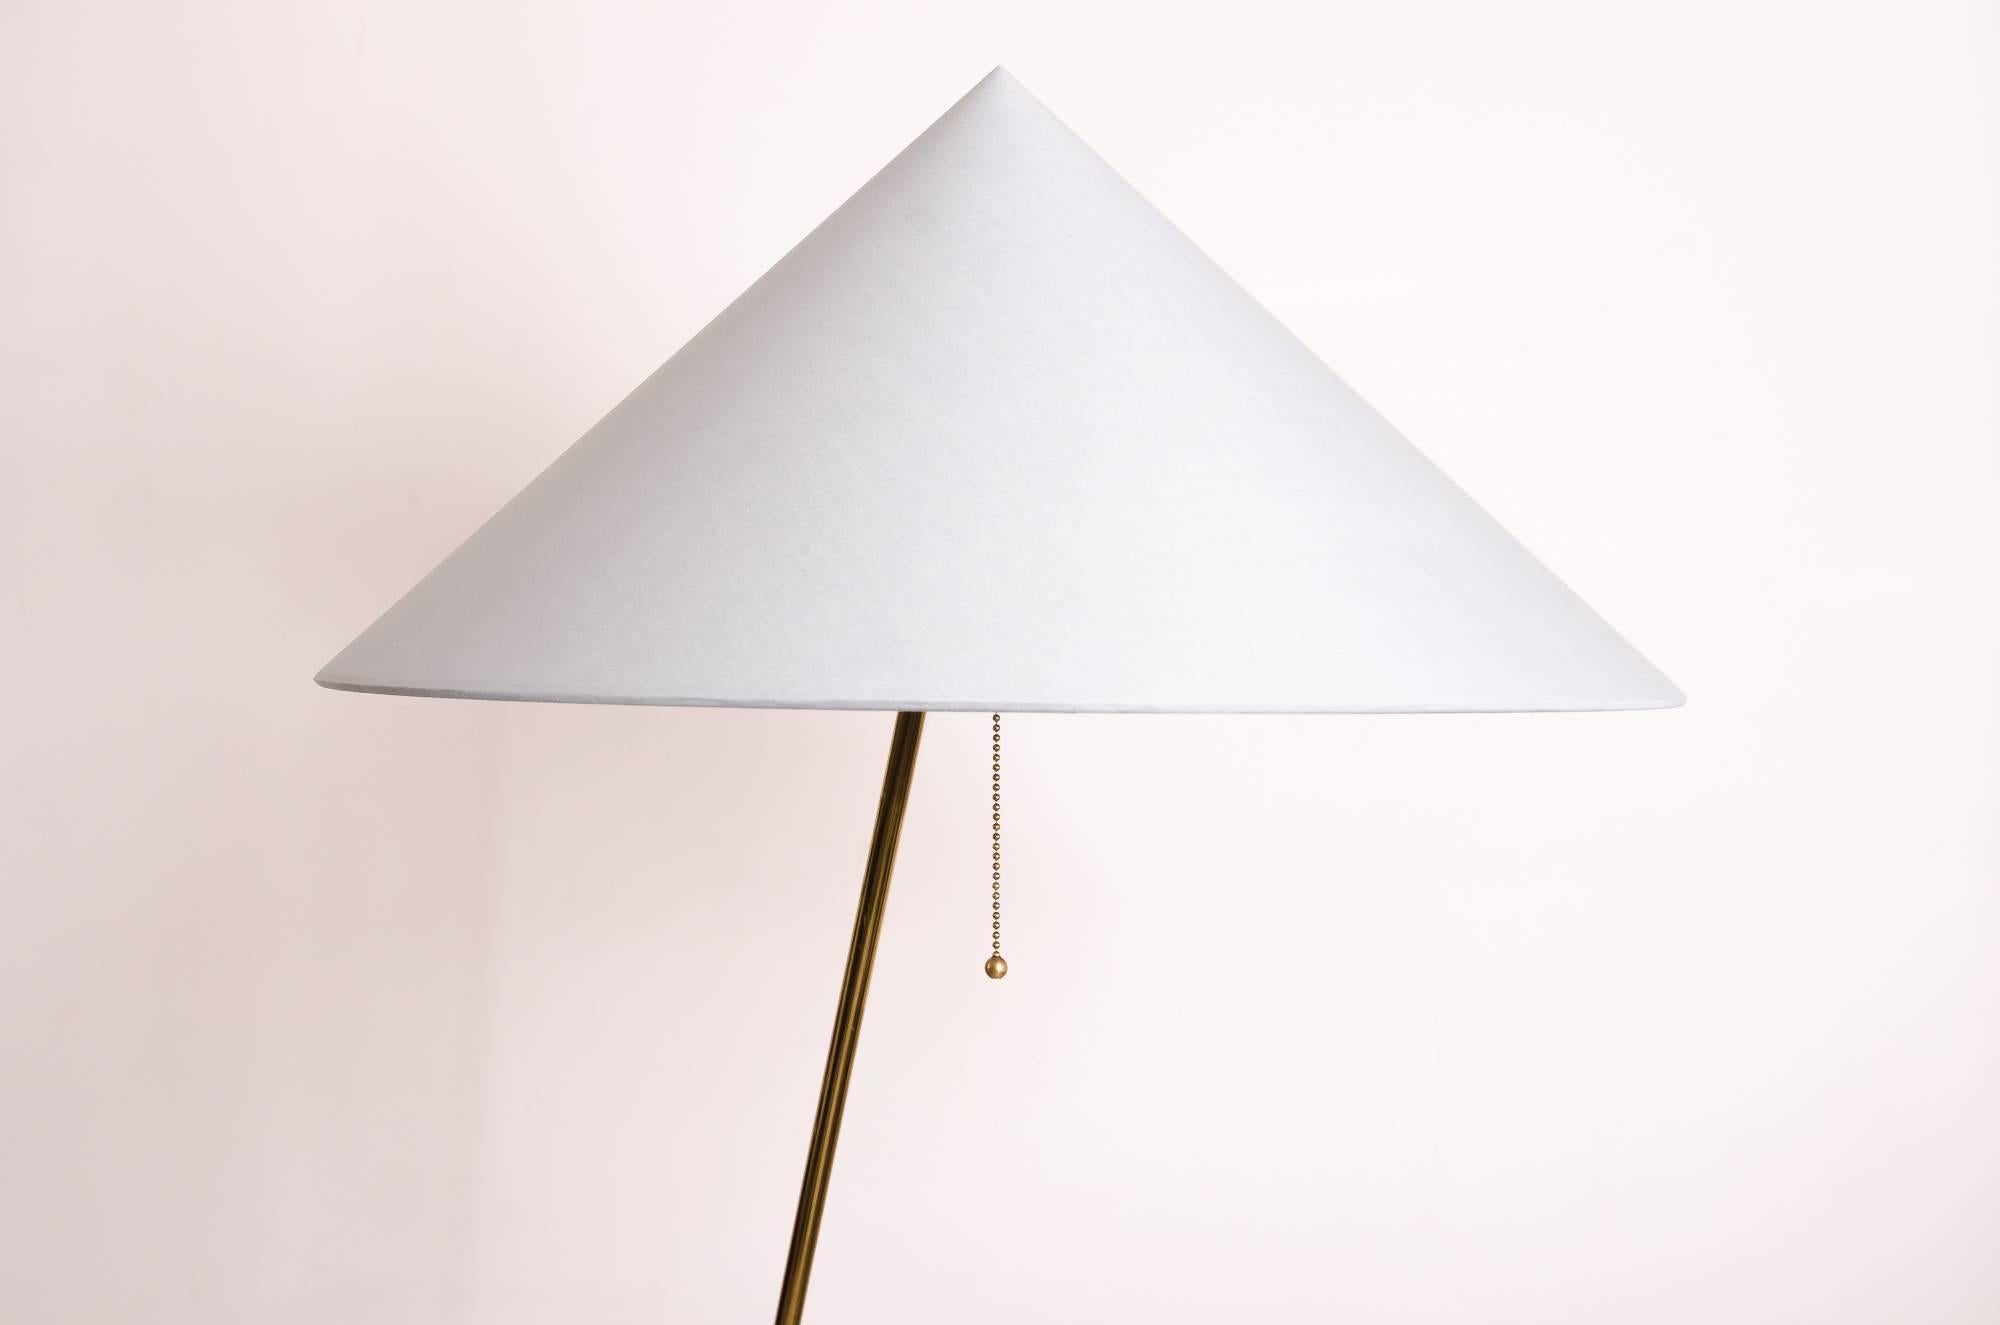 Charming golf floor lamp, designed Rupert Nikoll, Vienna, 1950
the lamp shades have been renewed as well based on the original dimensions.
Original condition.